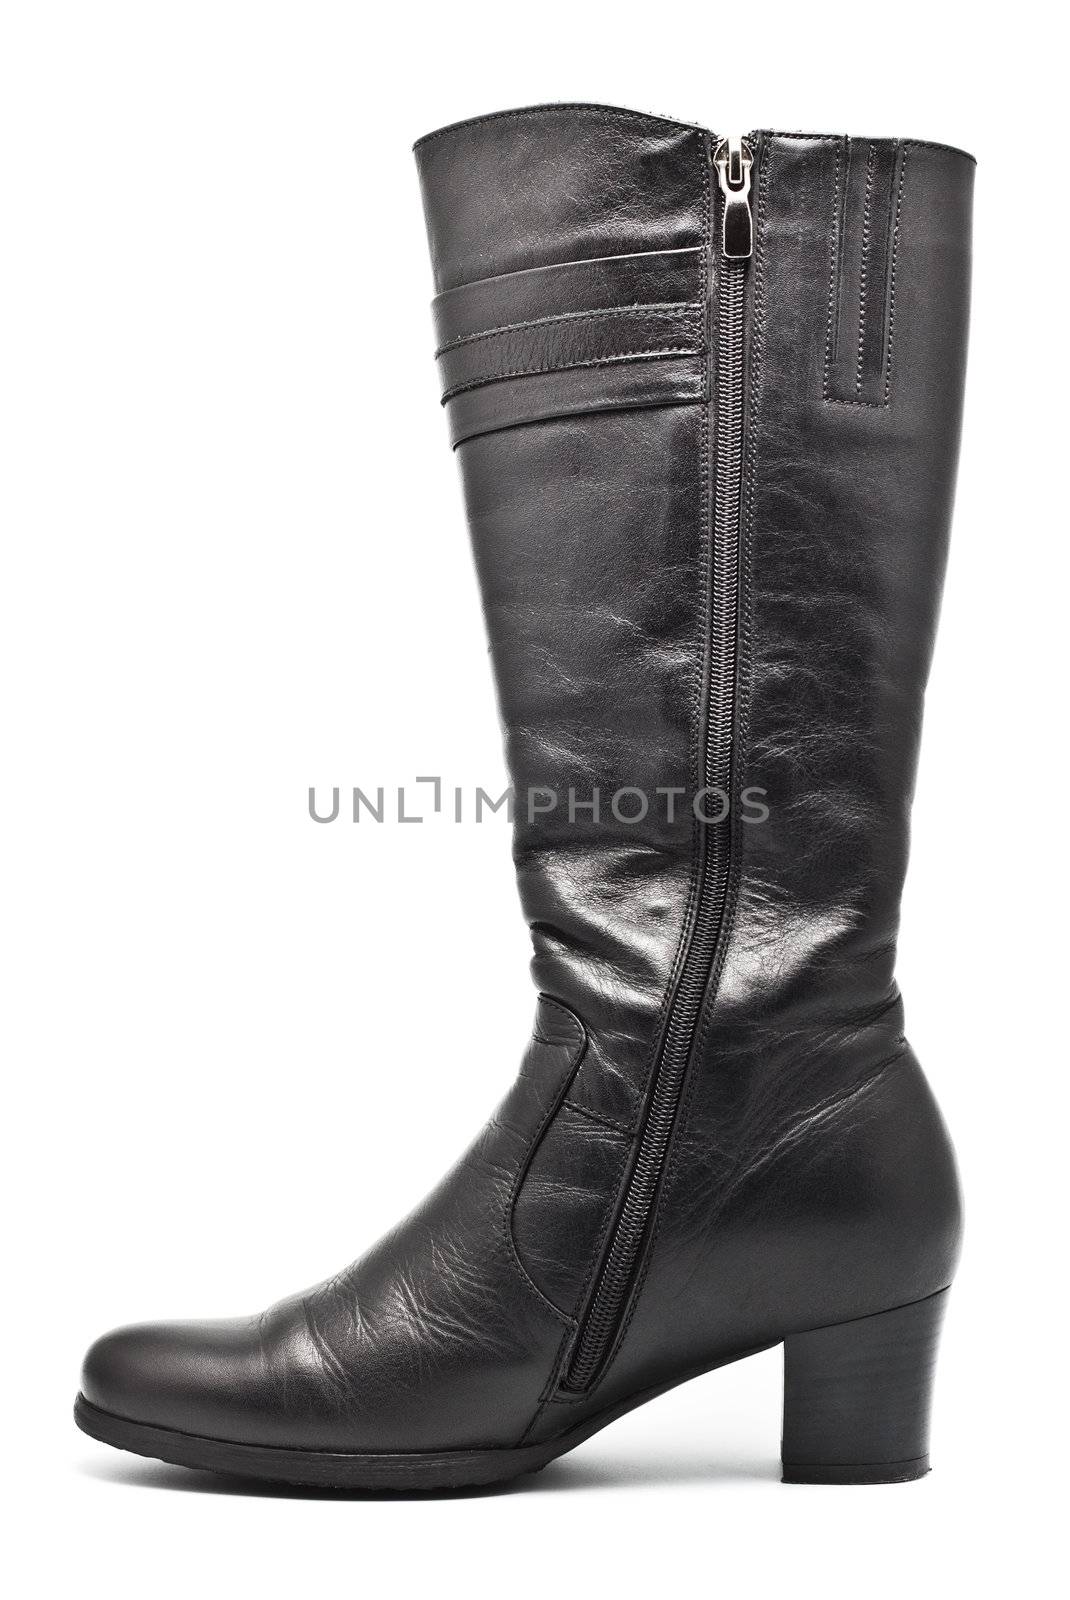 black leather female boots isolated on white